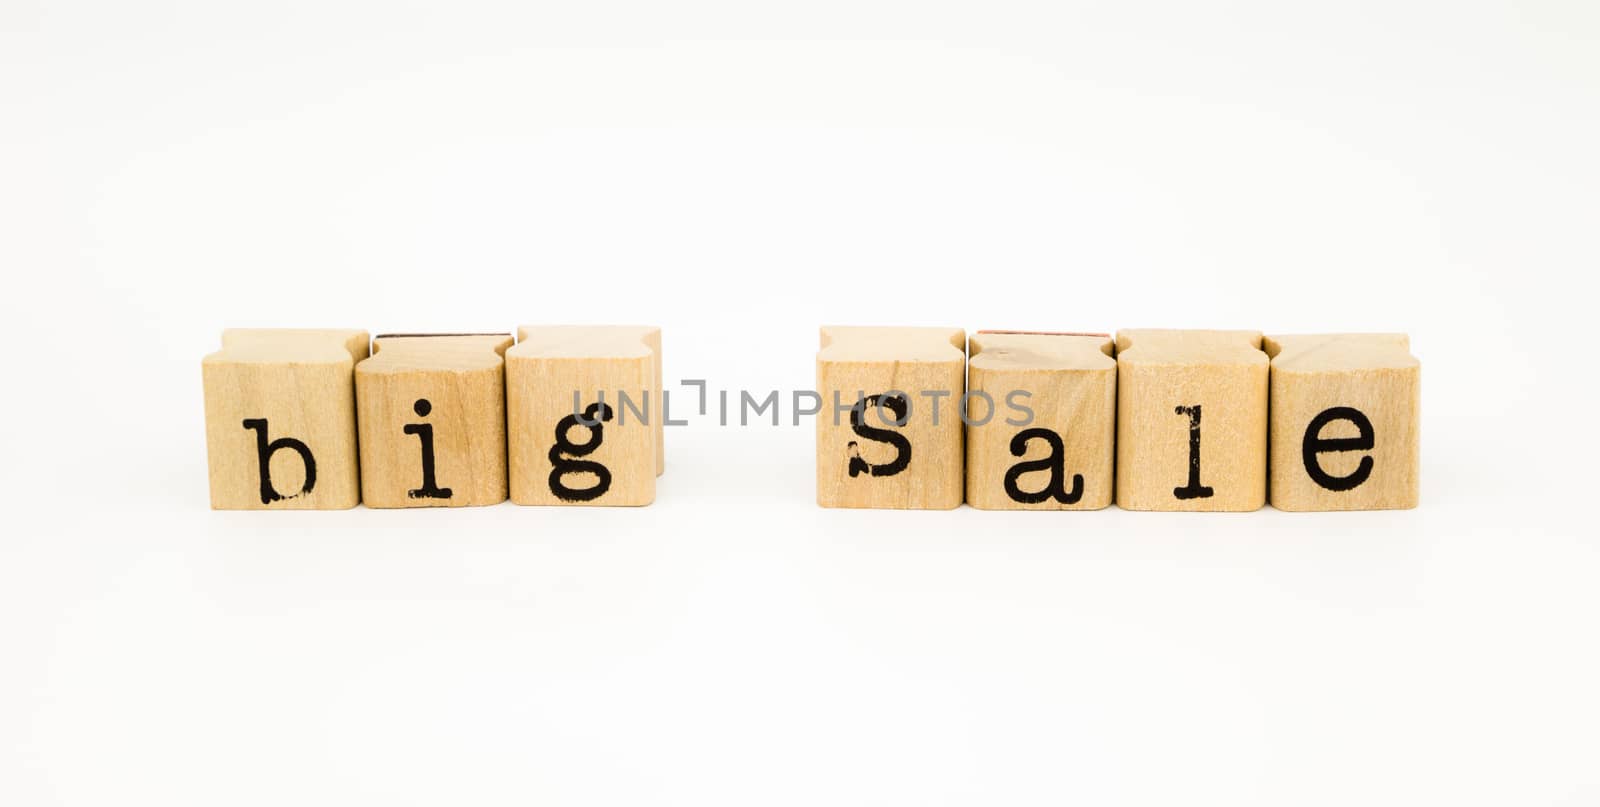 big sale wording isolate on white background by vinnstock